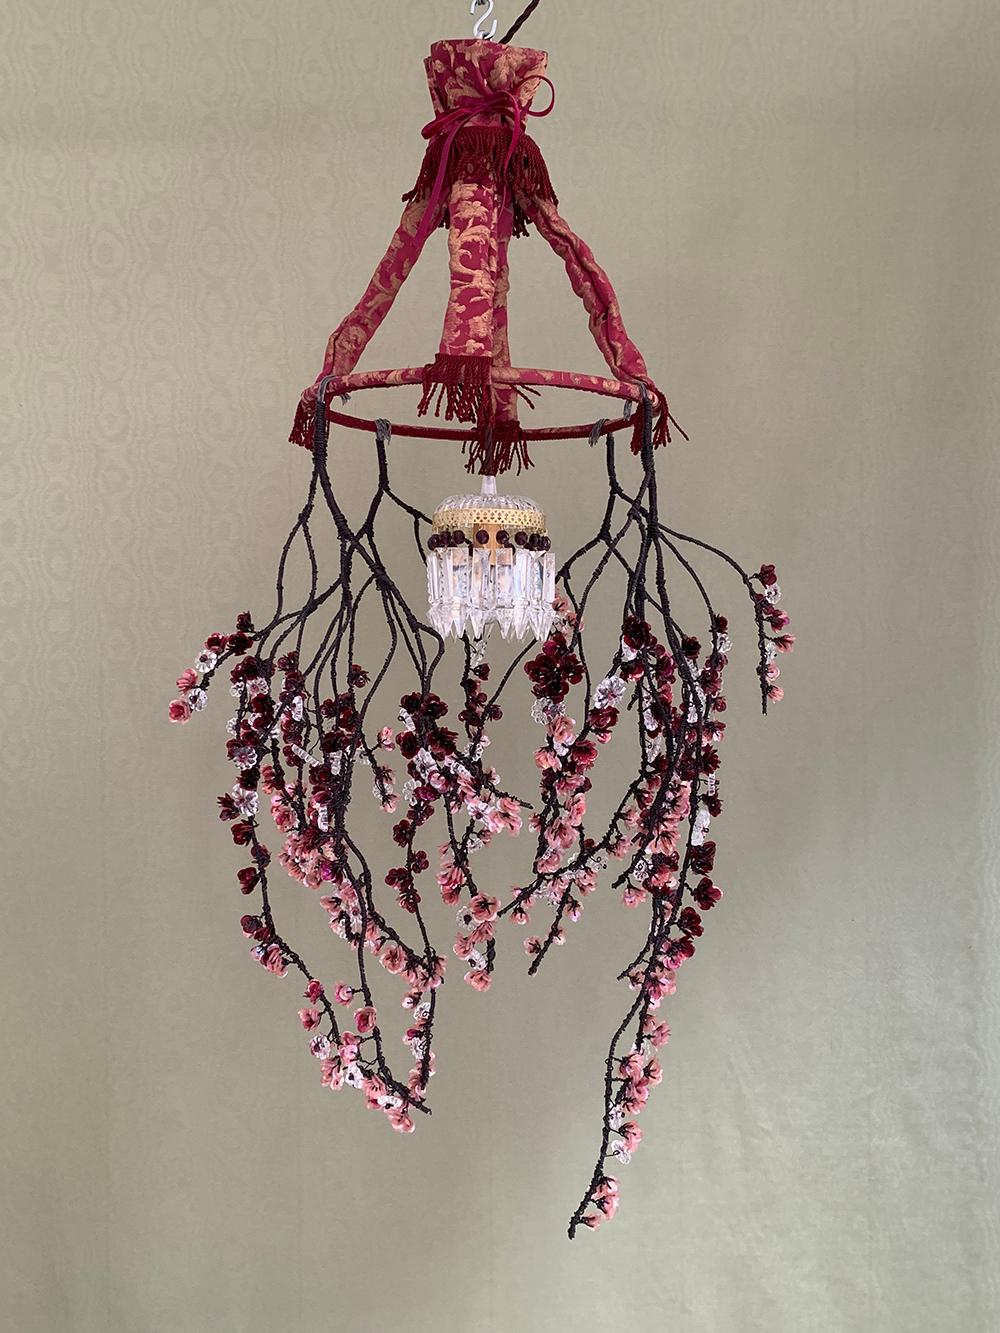 Haiku chandelier

A versatile chandelier entirely handmade in Italy by renowned artist and designer Valentina Giovando. It is inspired by Japanese culture and its female figures, as well as a tribute to Japanese poetry from XVII